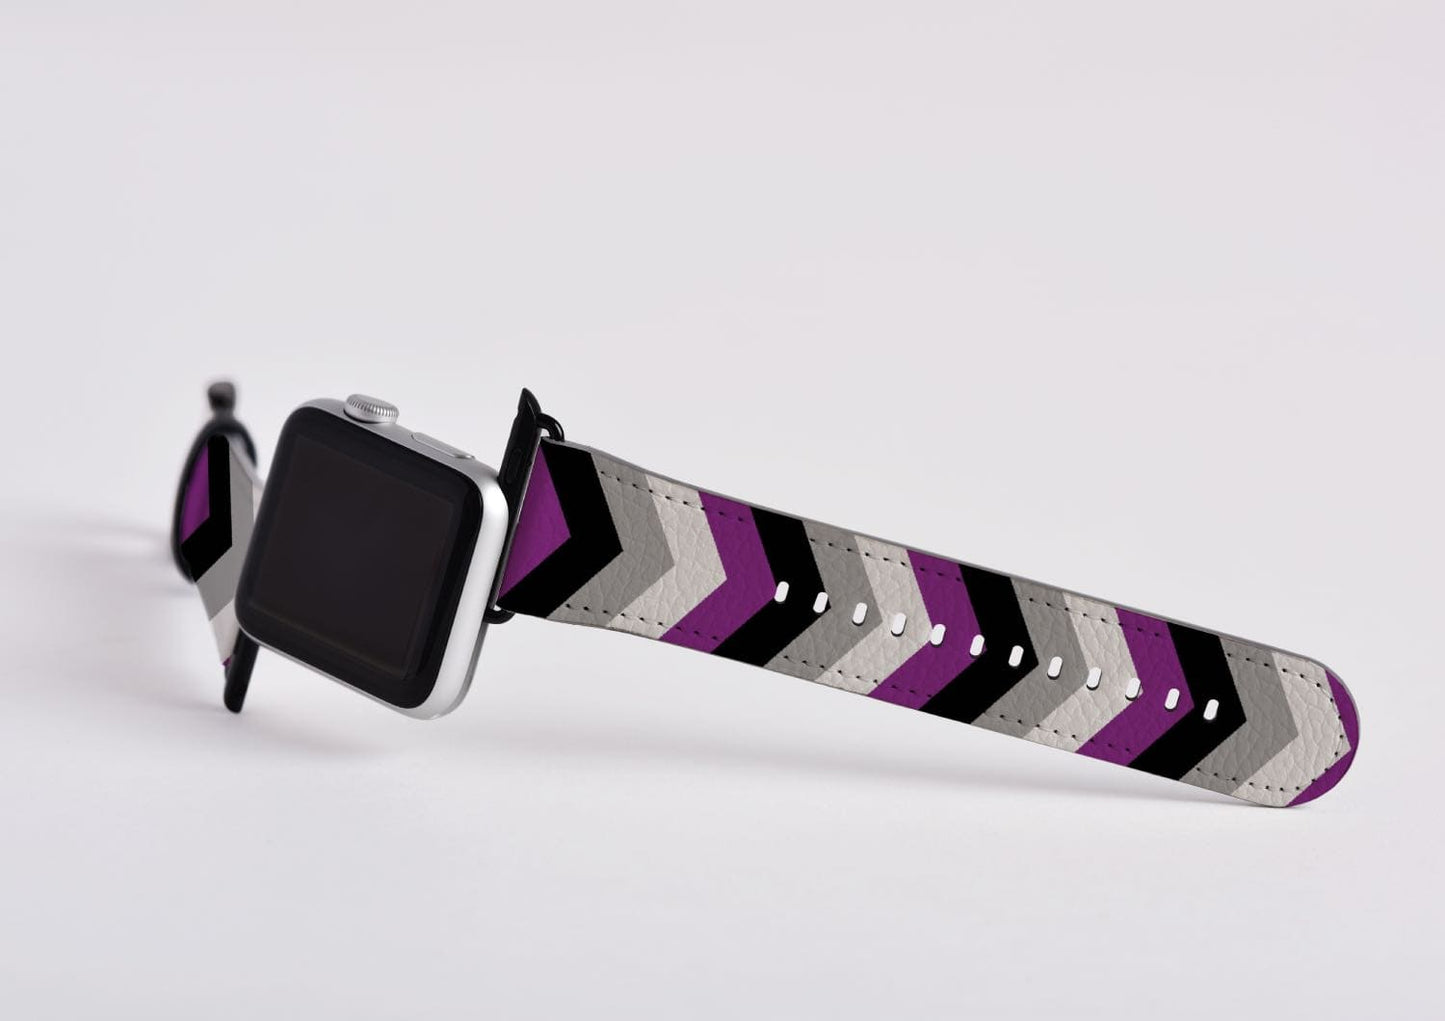 asexual apple watch band, discreet chevron pattern, attach